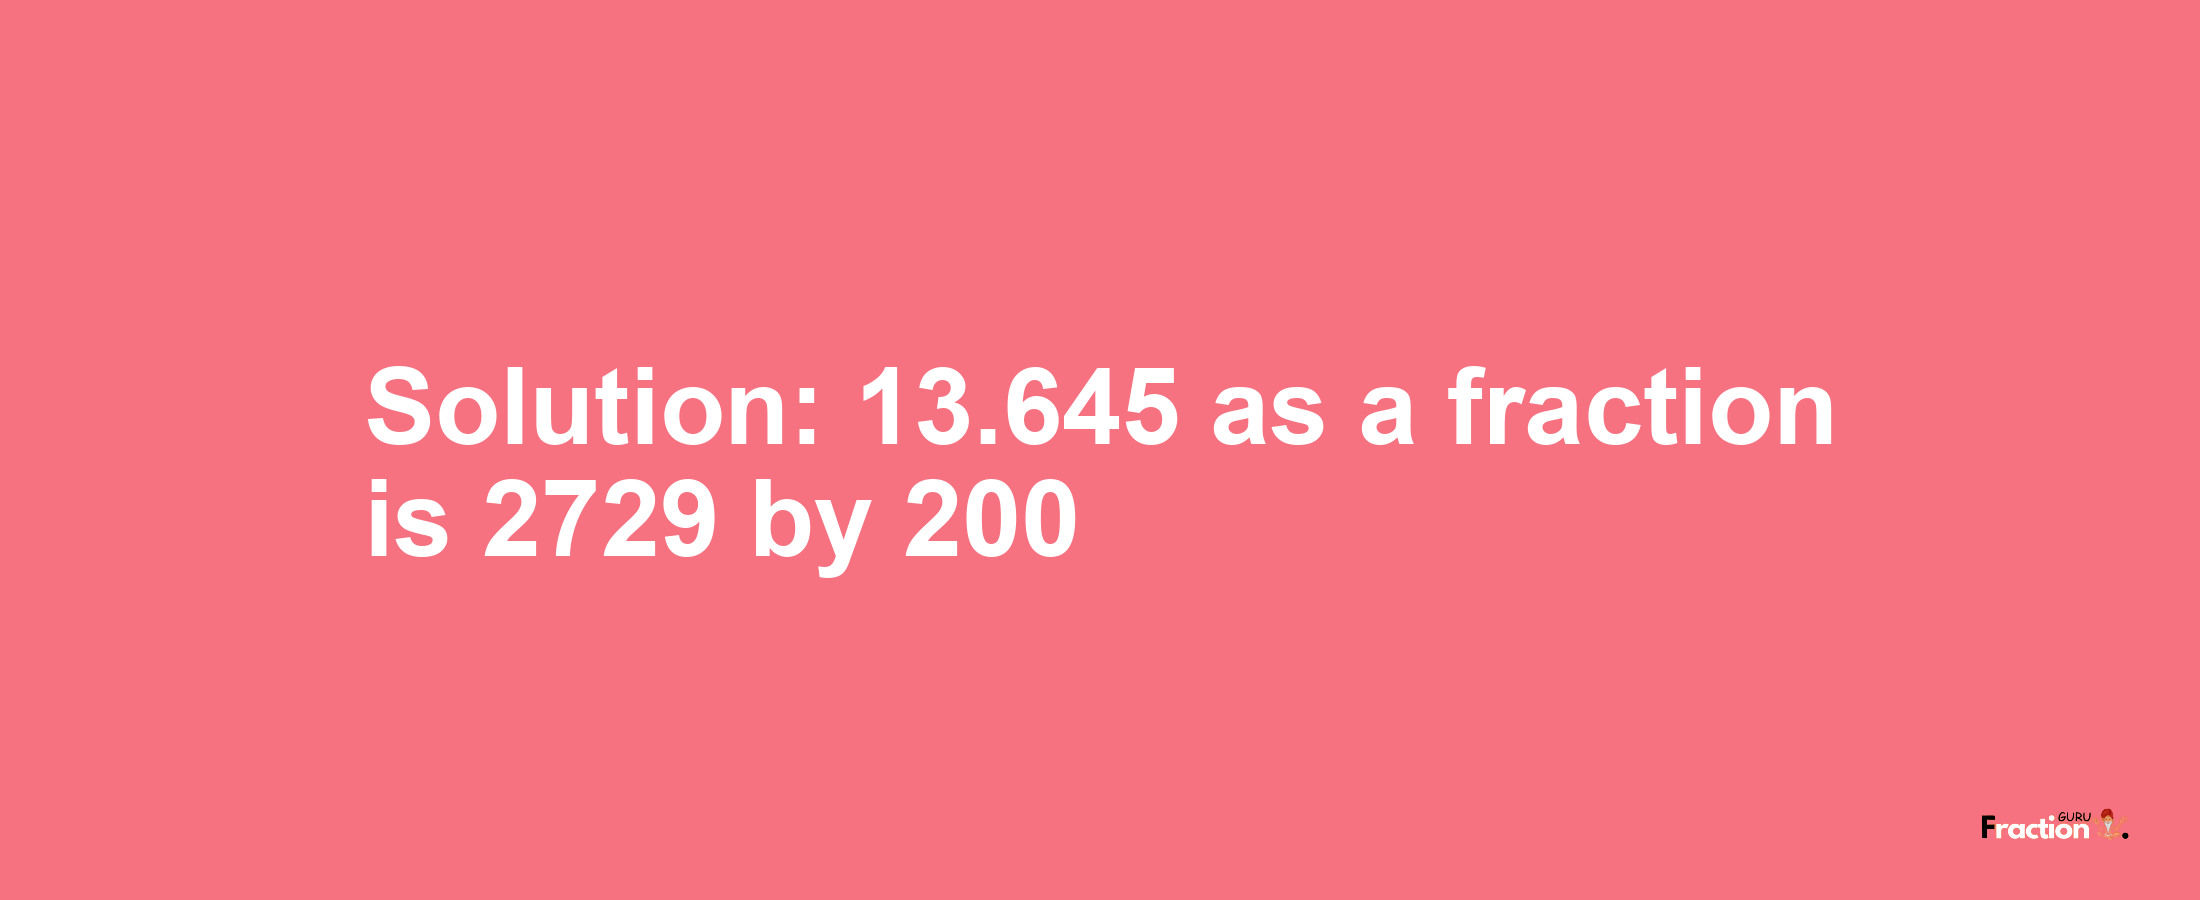 Solution:13.645 as a fraction is 2729/200